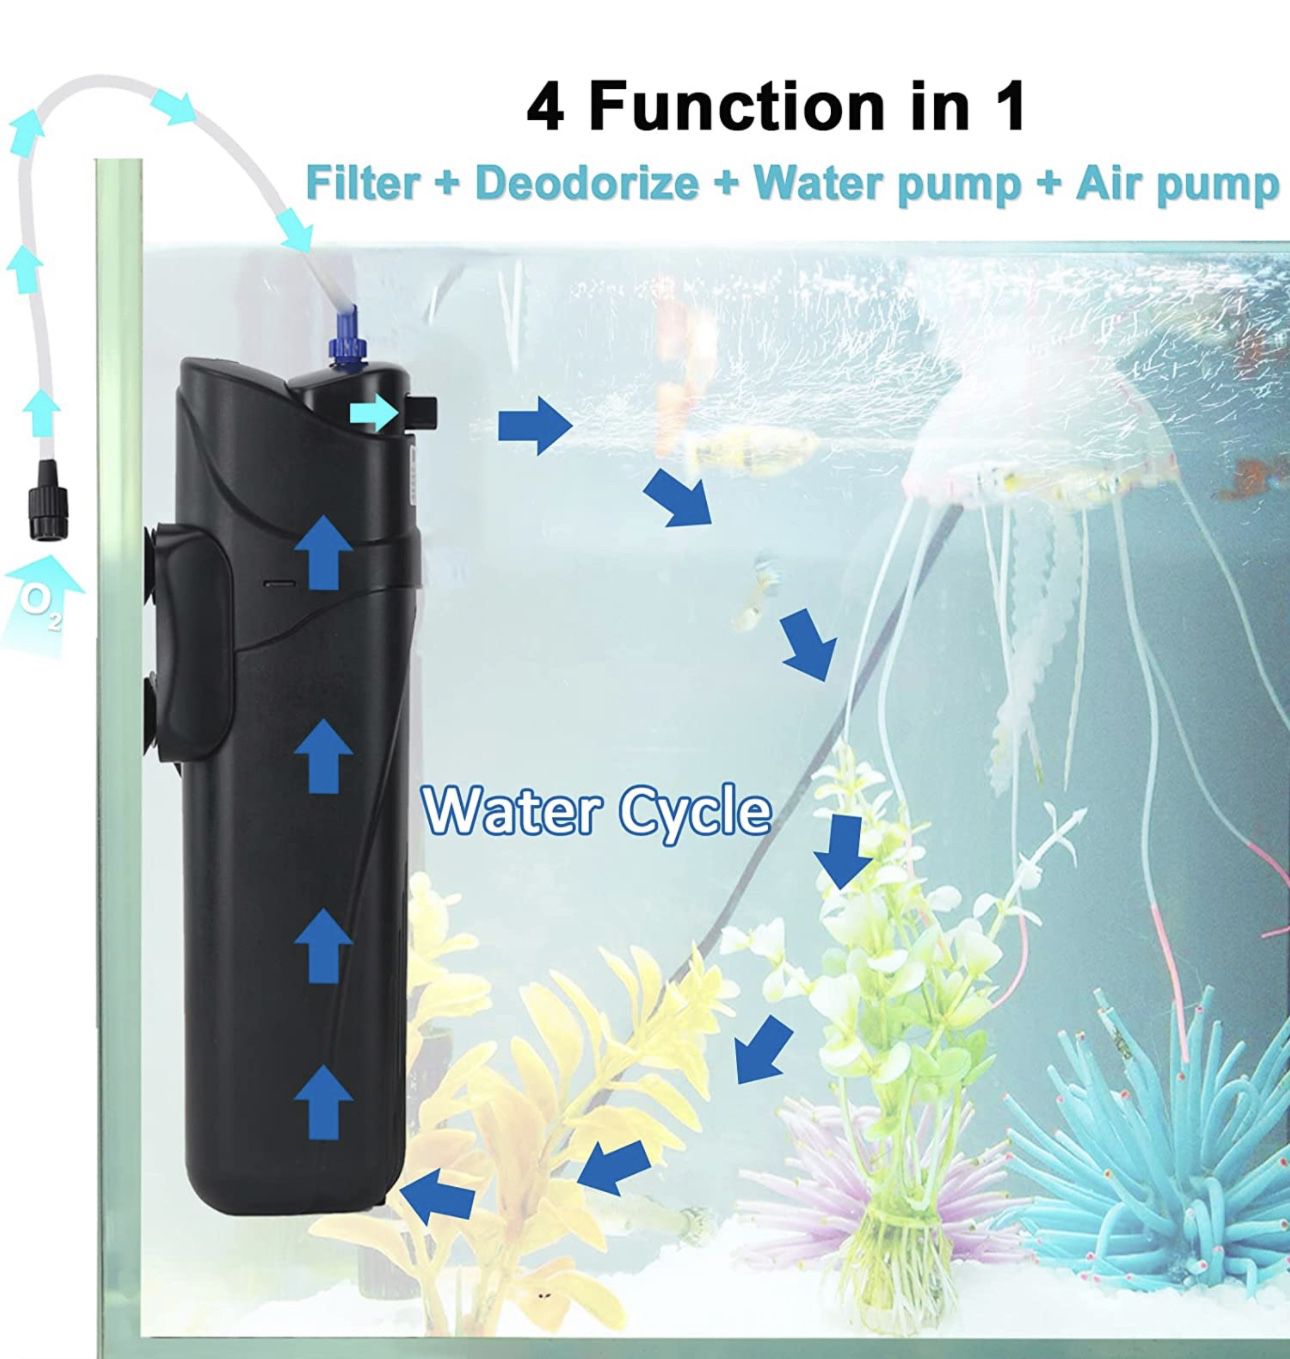 COOSPIDER Aquarium Filter Sun JUP-01 for 40-80 Gallon Tank Clear, U-V Fish Tank Green Clean Machine Submersible Pump w/ 1 Spare Bulb + 2 Replace Filte